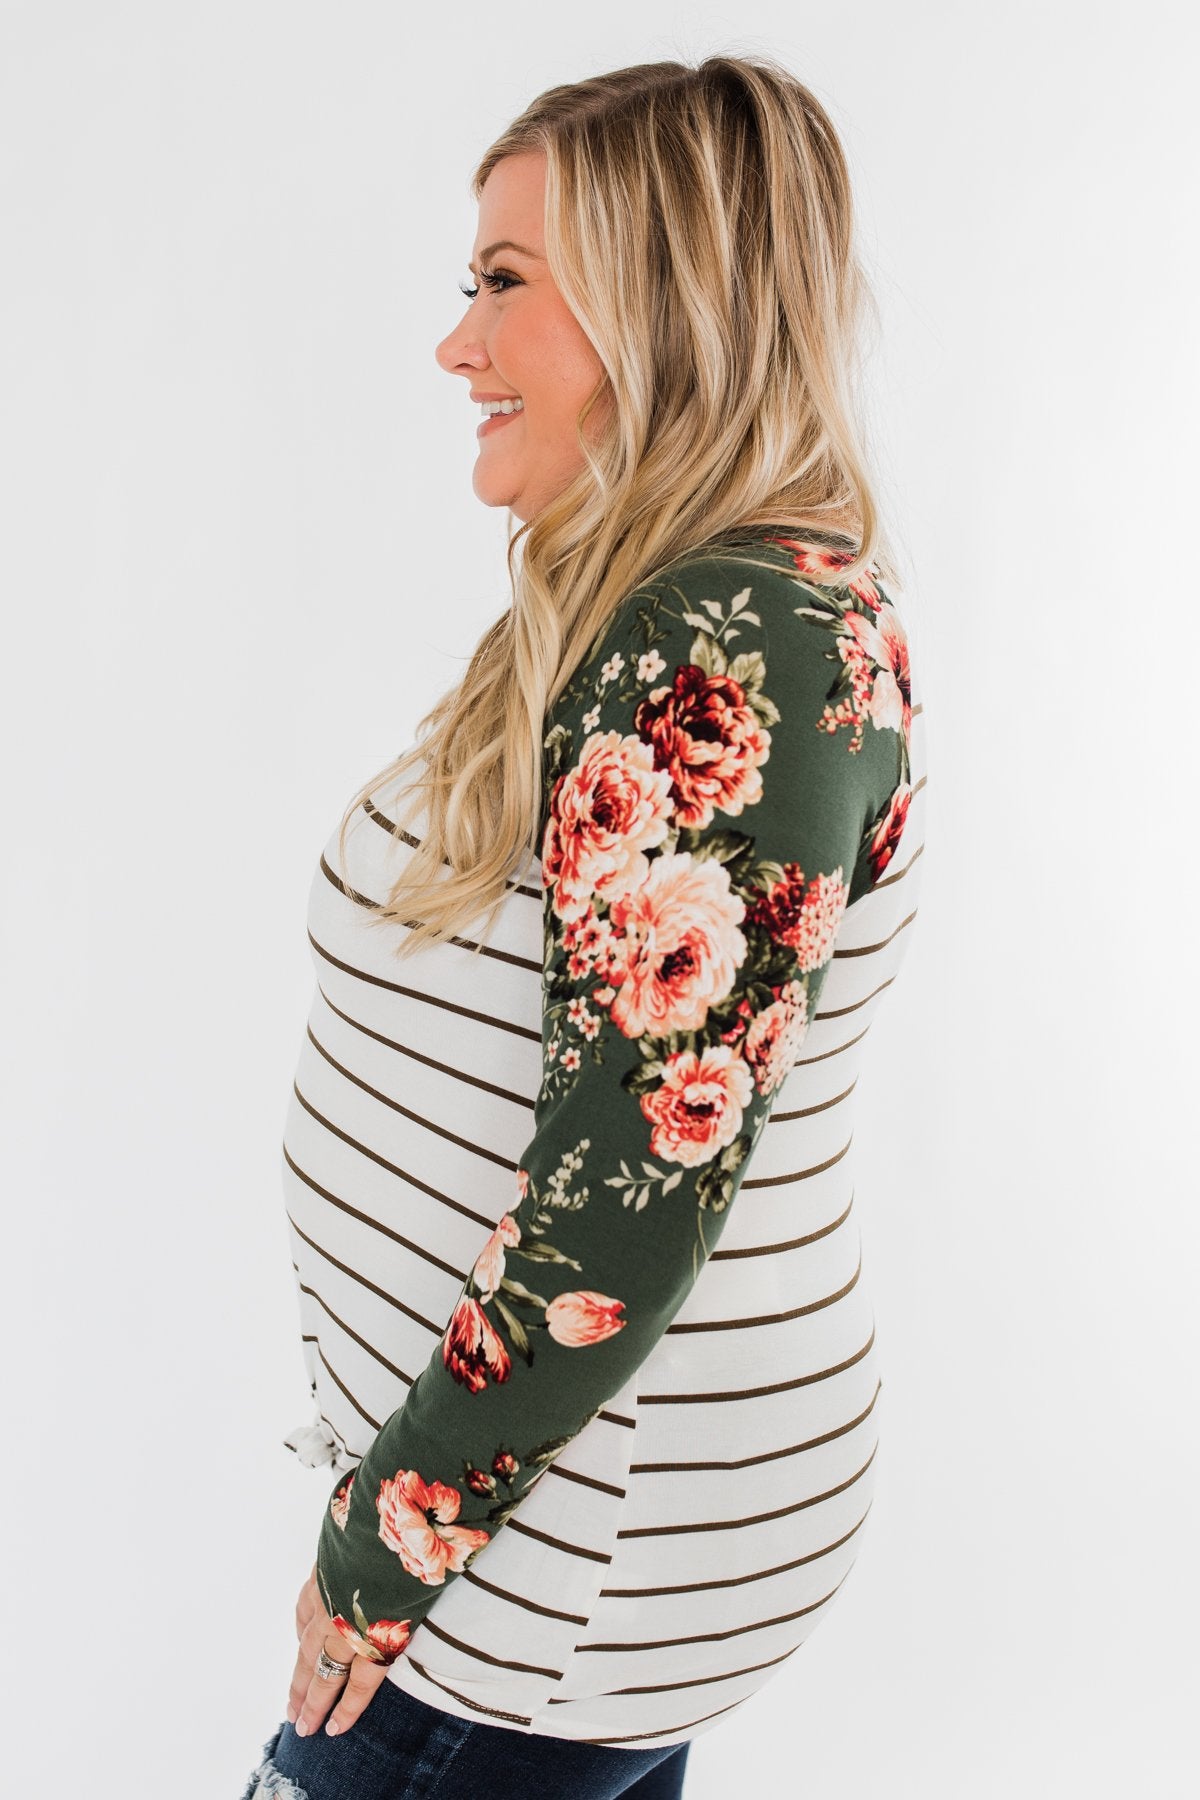 The Perfect Day Striped Floral Top- Olive & Ivory